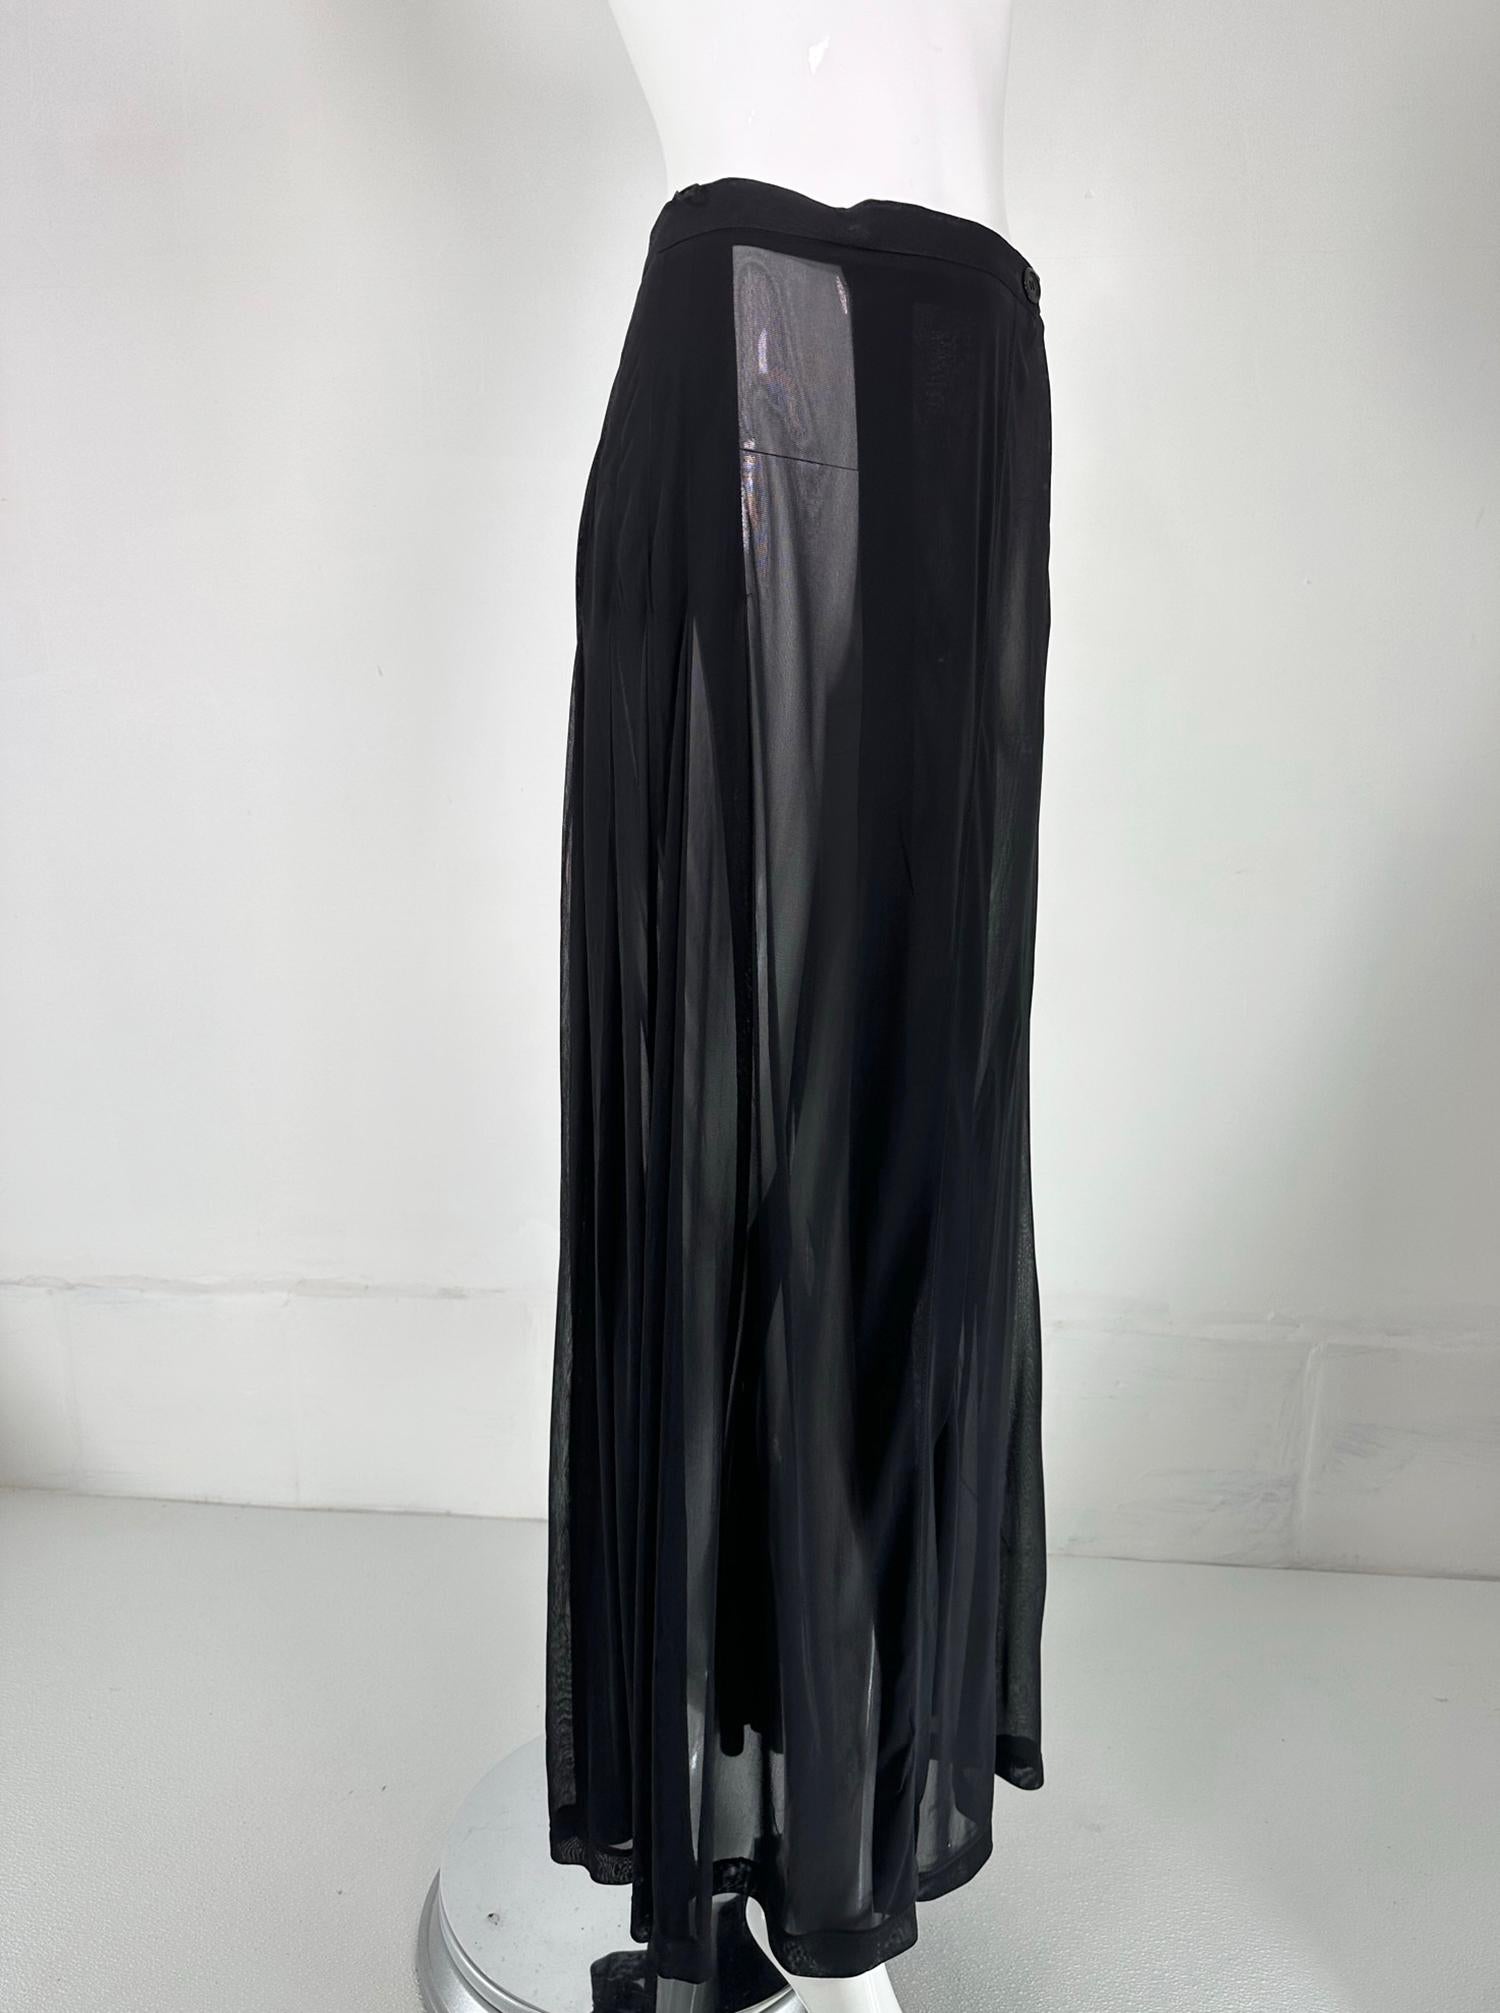 Moschino Couture sheer black wrap front pleated maxi skirt from the 1990s. Sheer black rayon chiffon skirt with a narrow waist band that wraps & closes at the waist front with buttons. The front panels over-lap from the skirt sides to the front. The